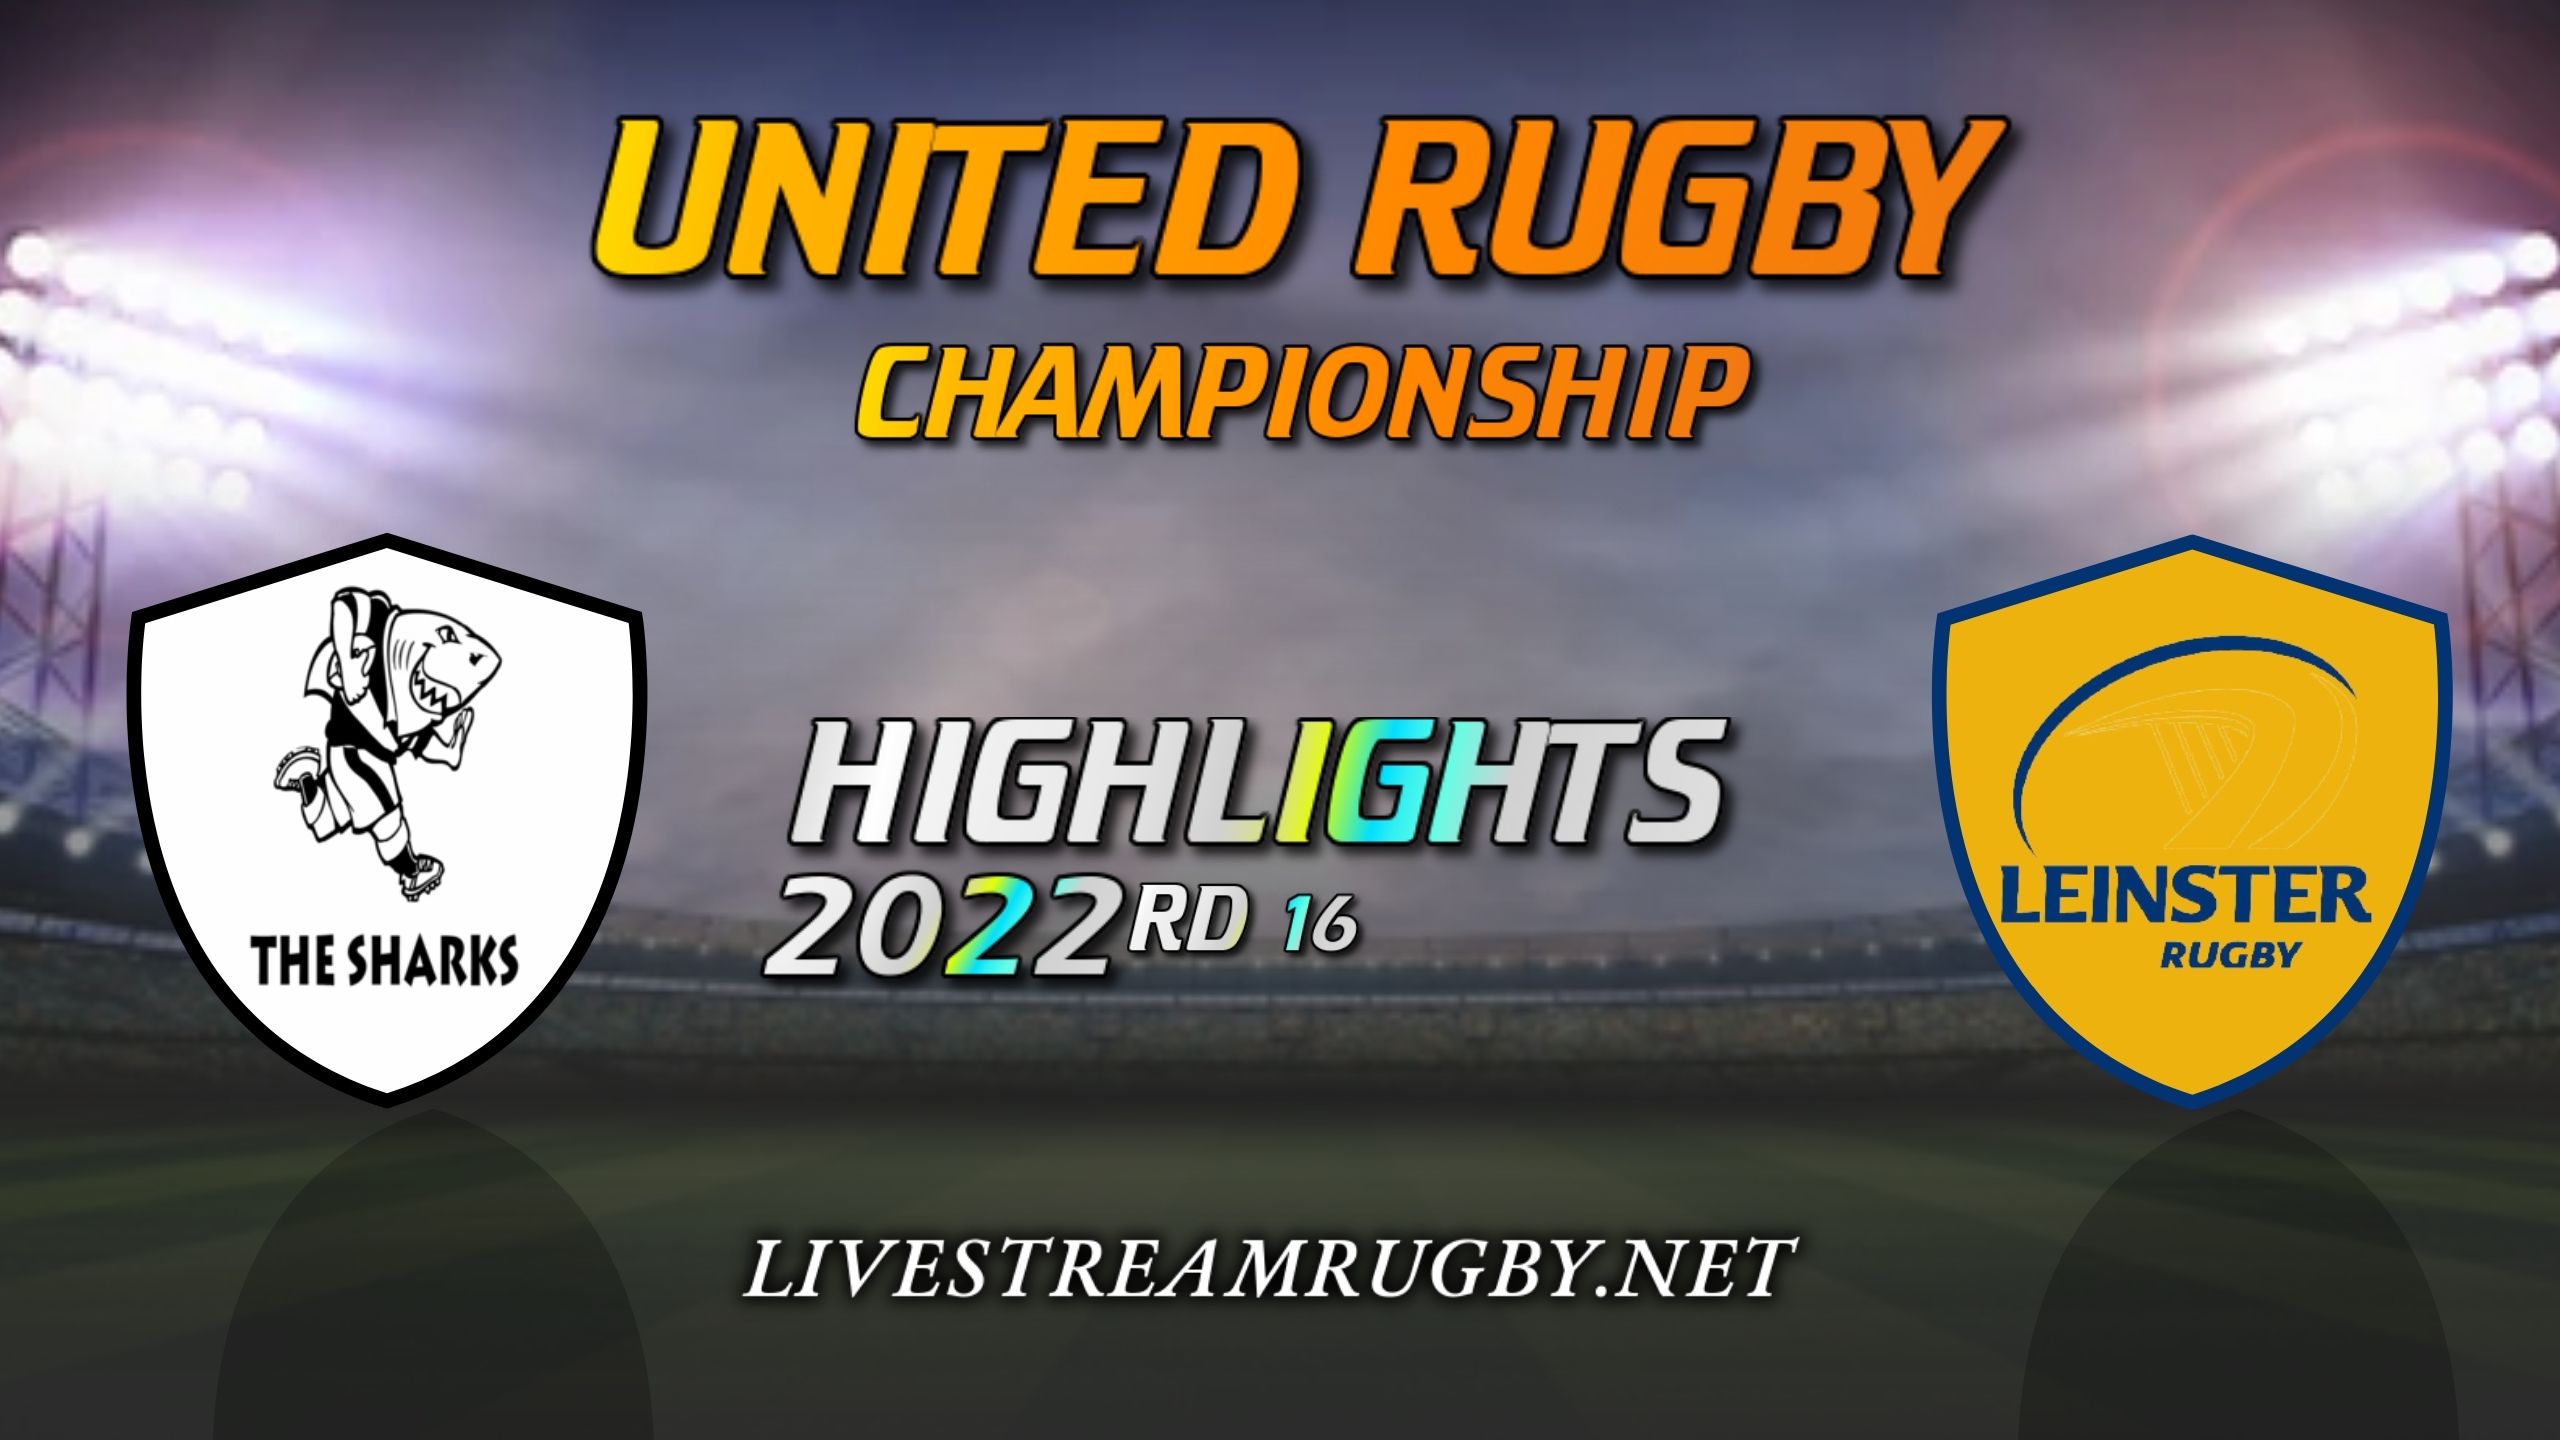 Sharks Vs Leinster Highlights 2022 Rd 16 United Rugby